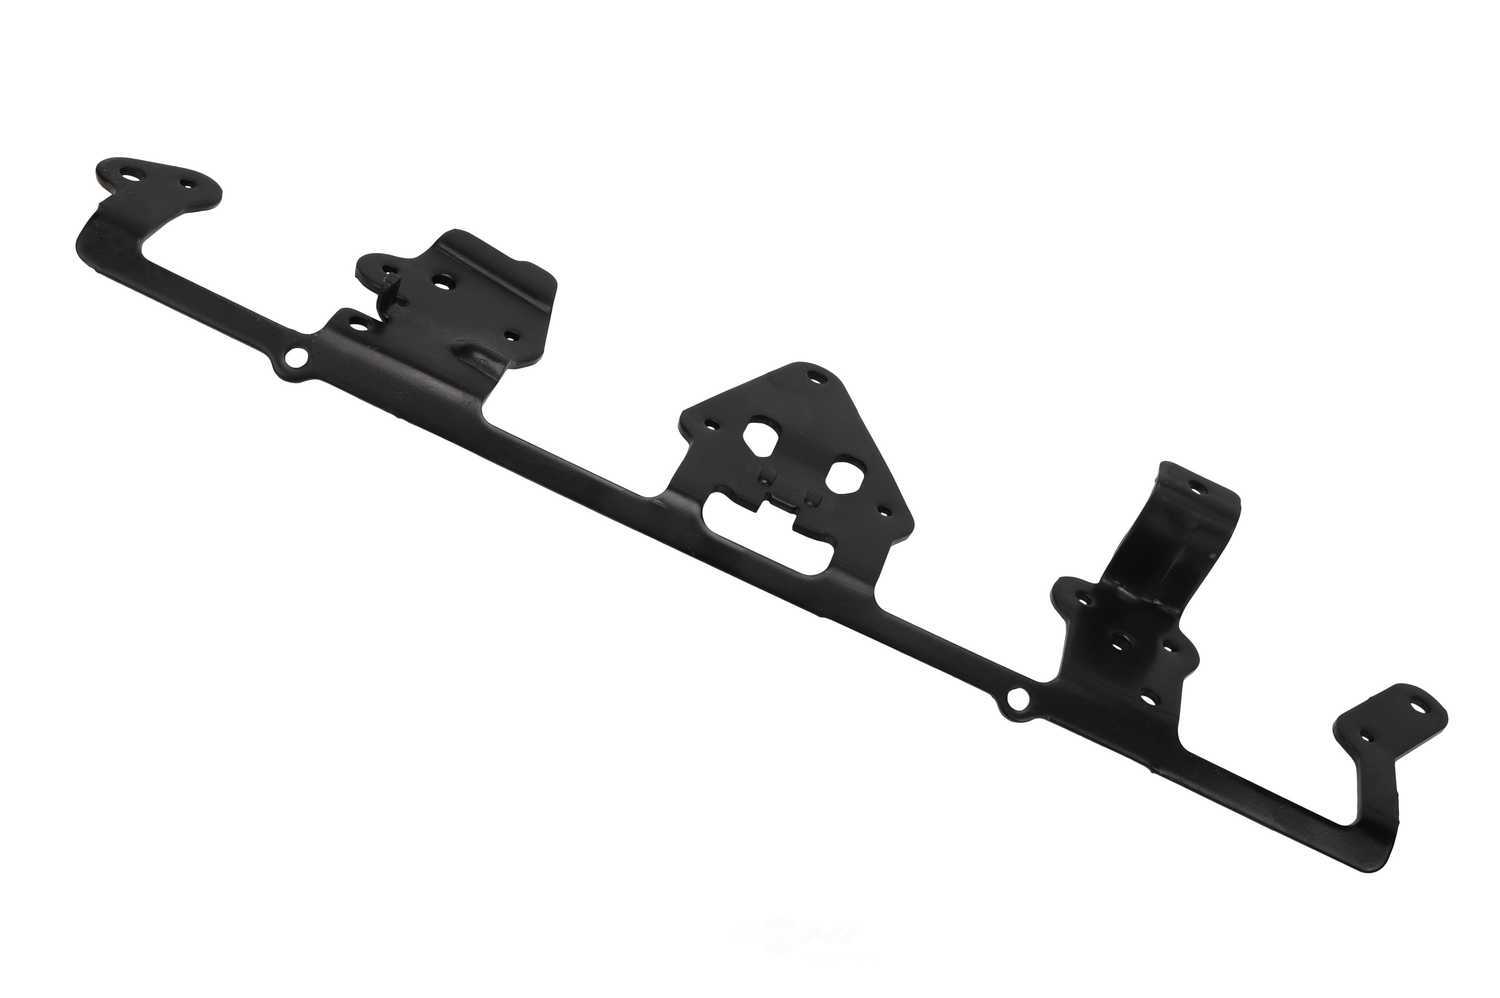 GM GENUINE PARTS - Ignition Coil Mounting Bracket - GMP 10457736